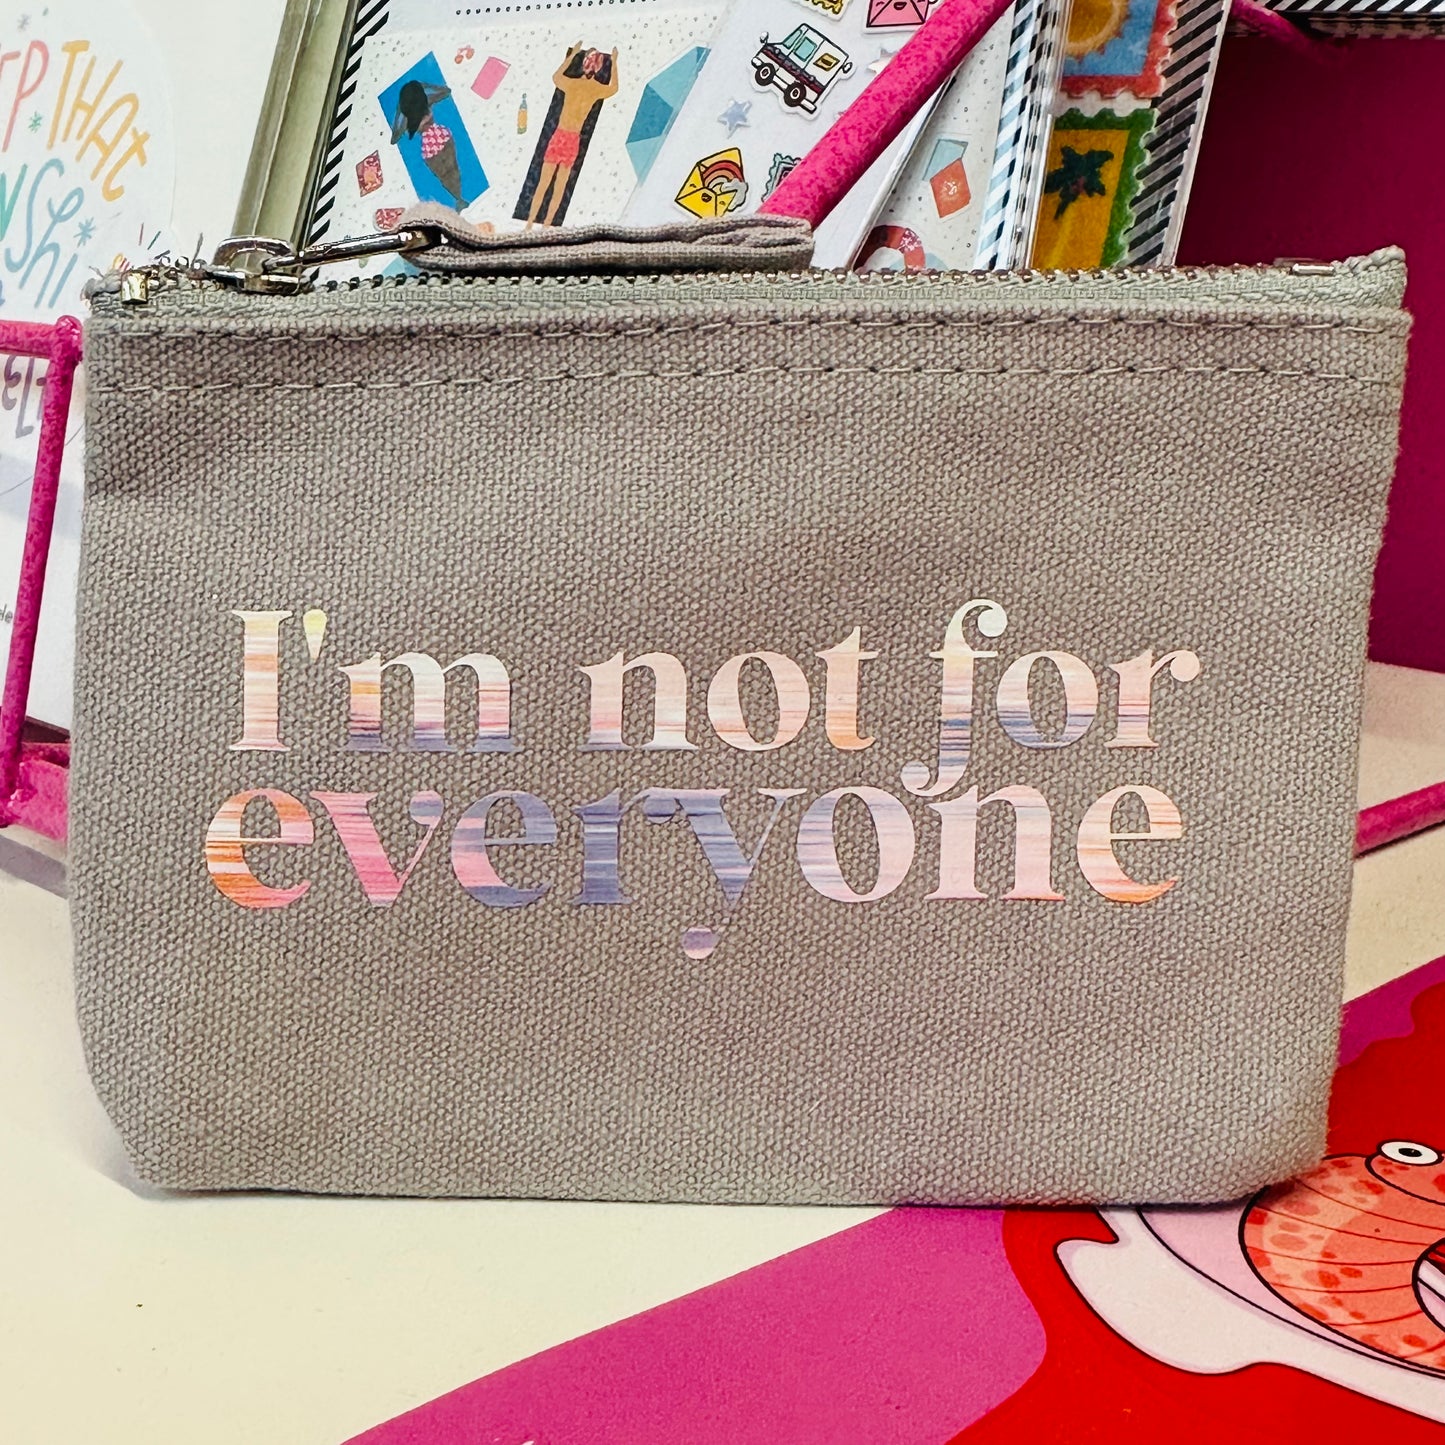 I’m Not For Everyone Coin Purse